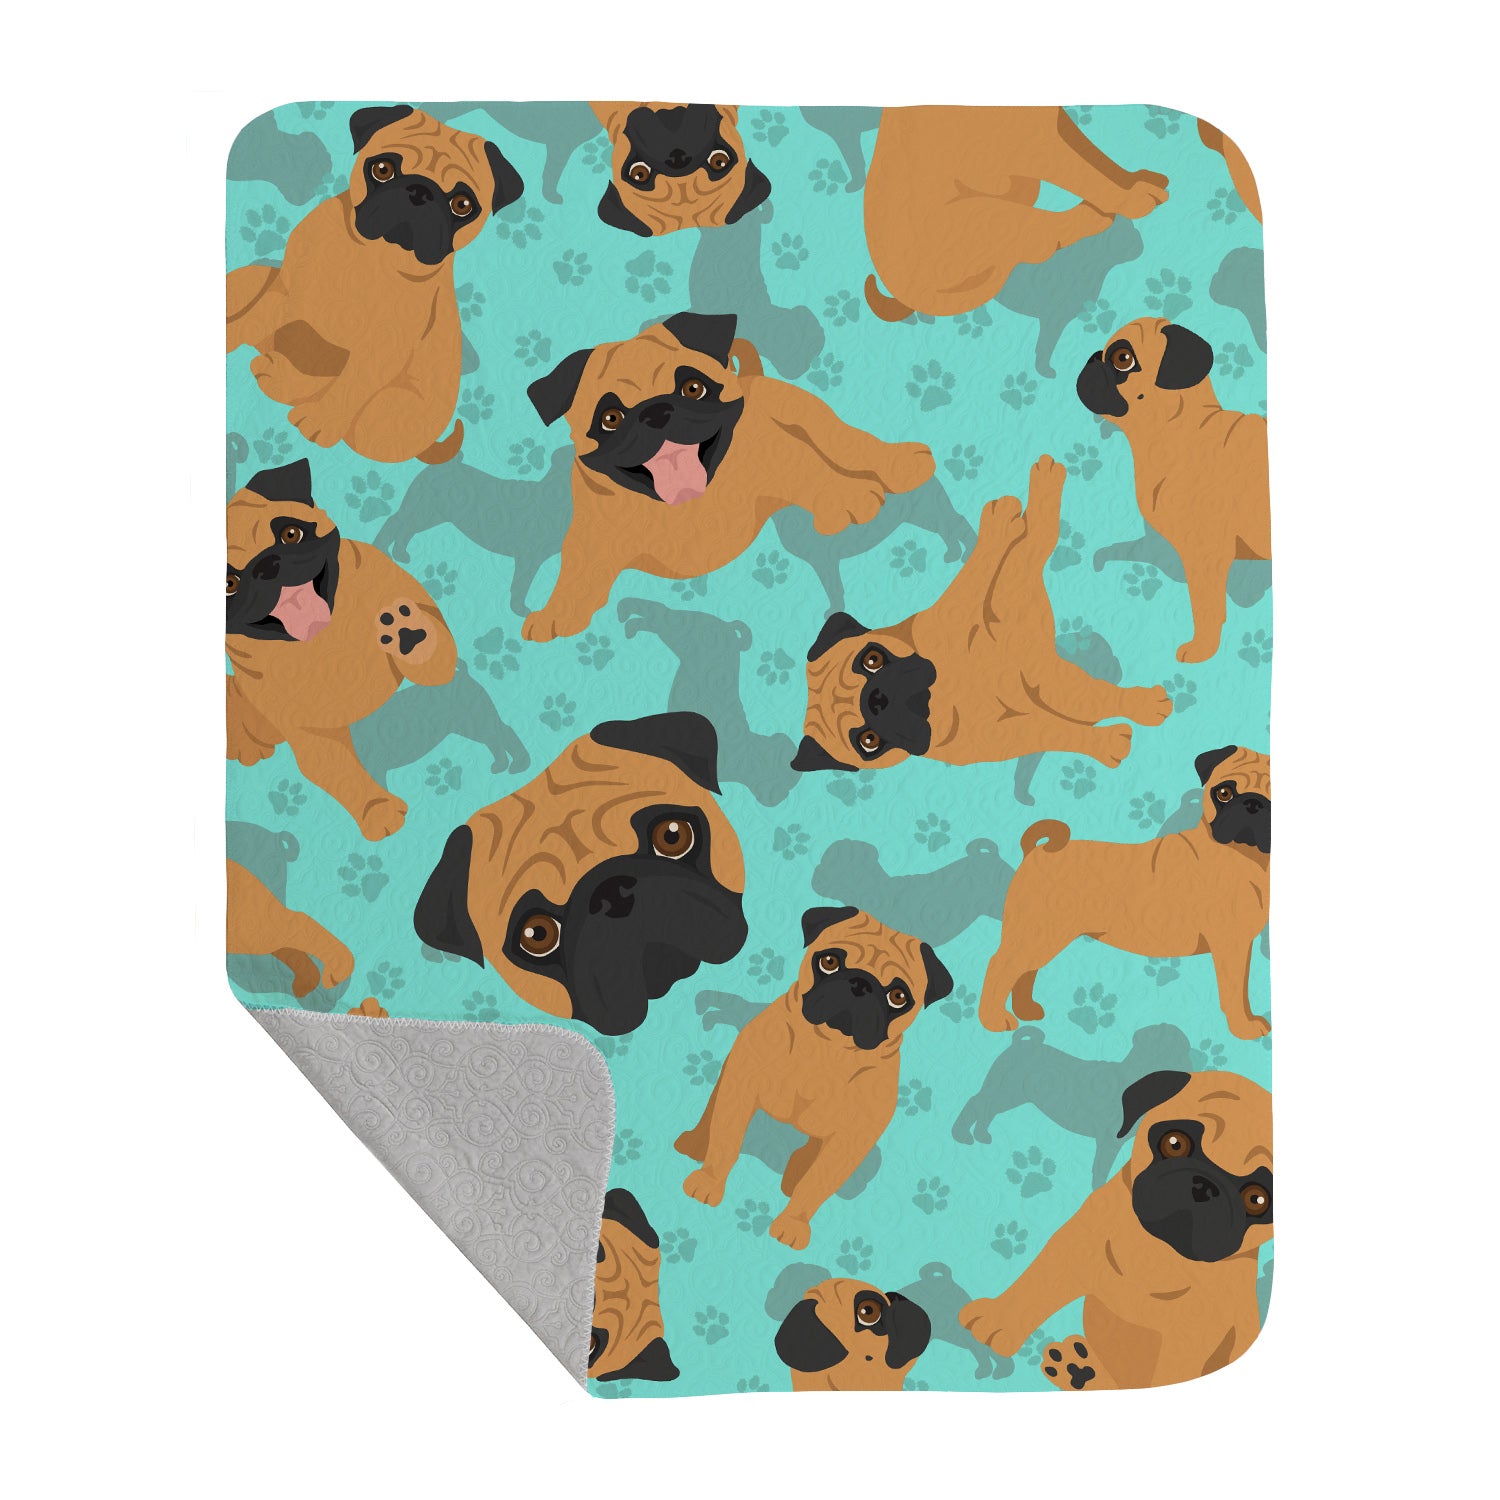 Buy this Apricot Pug Quilted Blanket 50x60